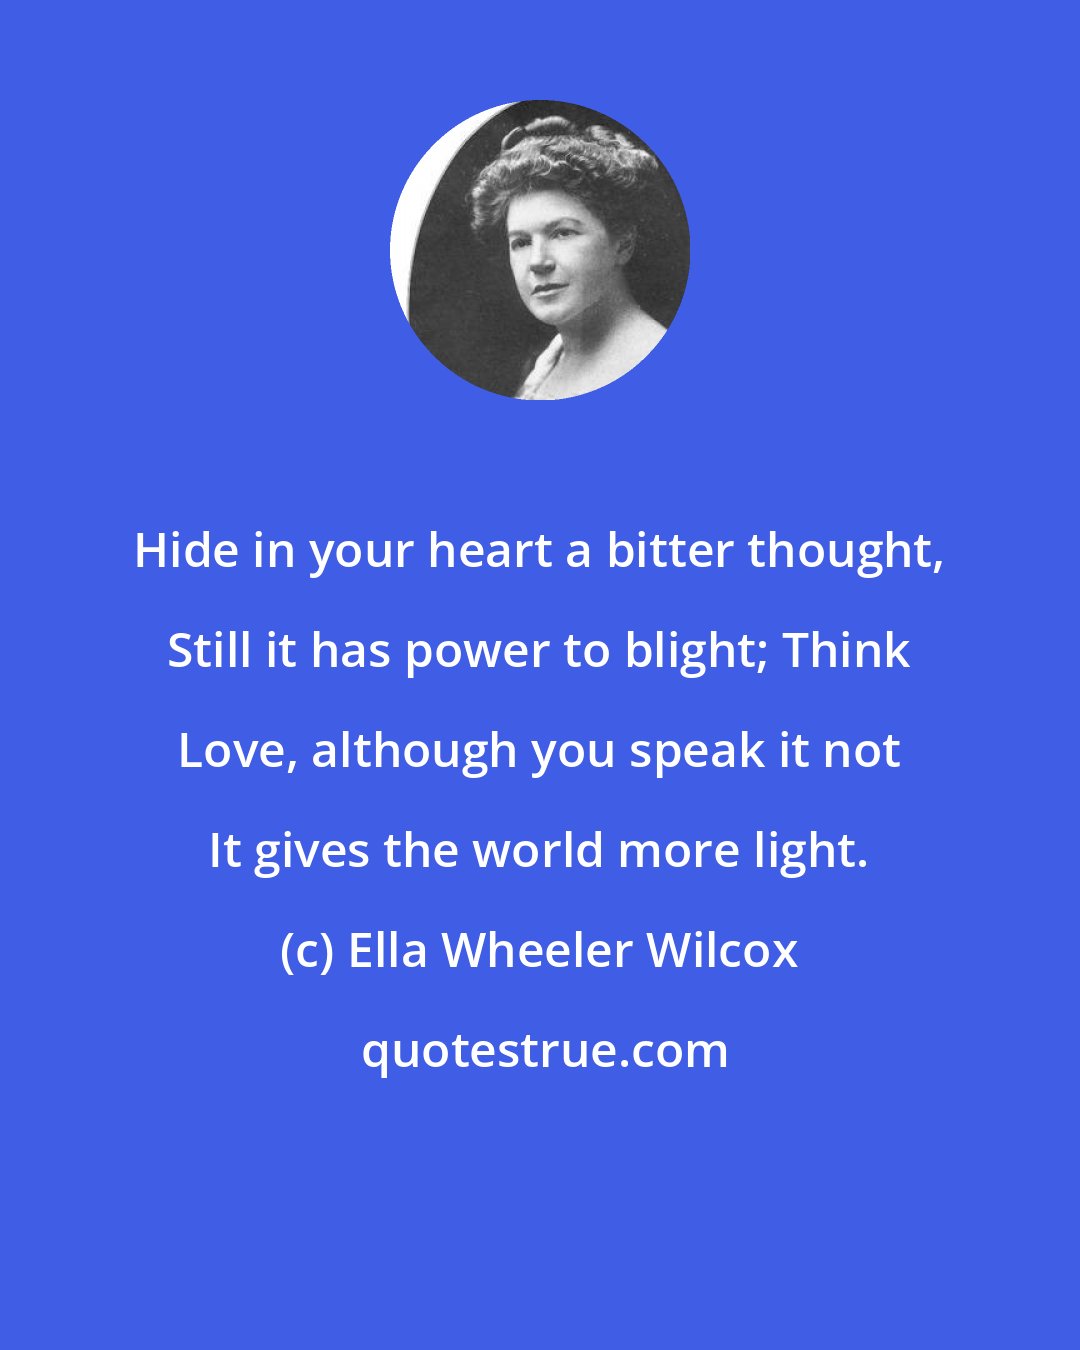 Ella Wheeler Wilcox: Hide in your heart a bitter thought, Still it has power to blight; Think Love, although you speak it not It gives the world more light.